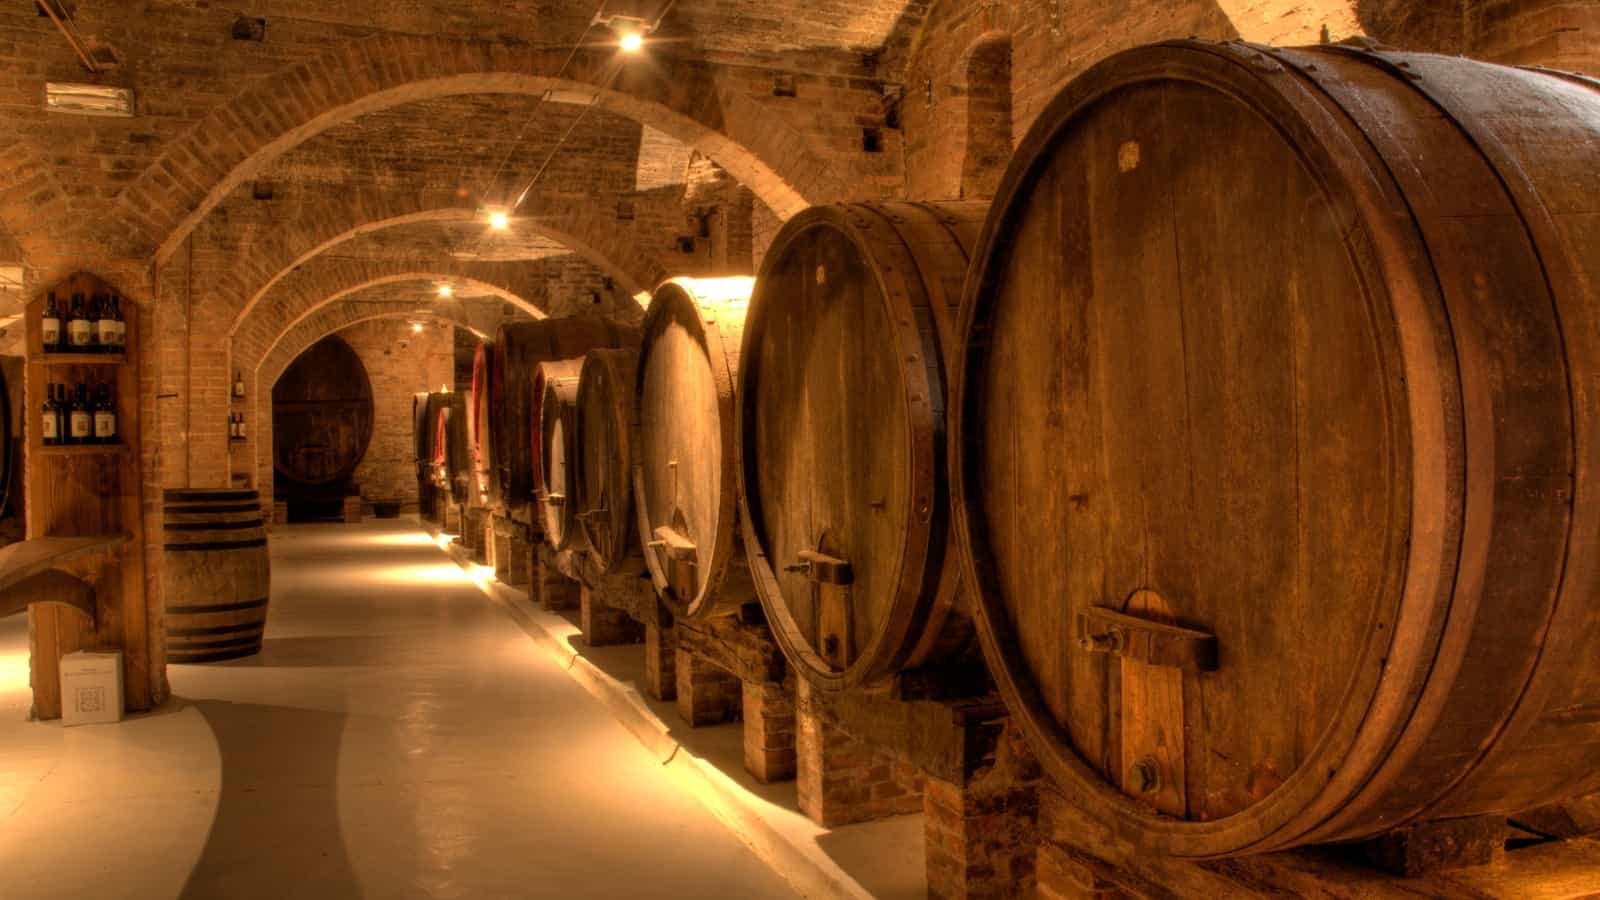 Large barrels of wine in the cellar of the winery